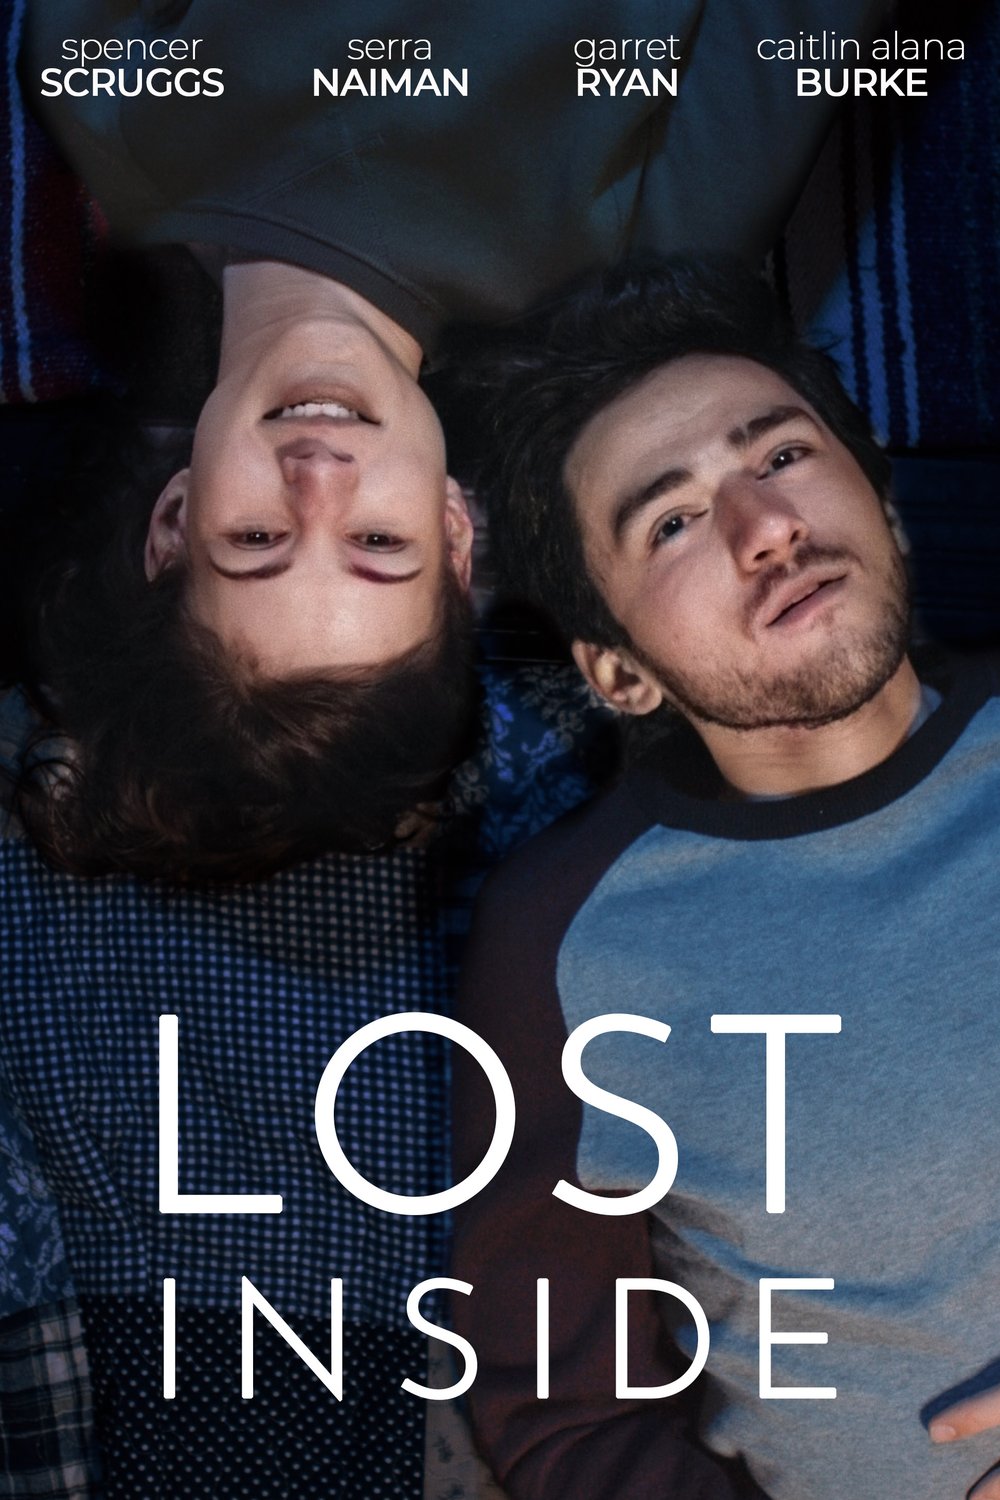 Poster of the movie Lost Inside